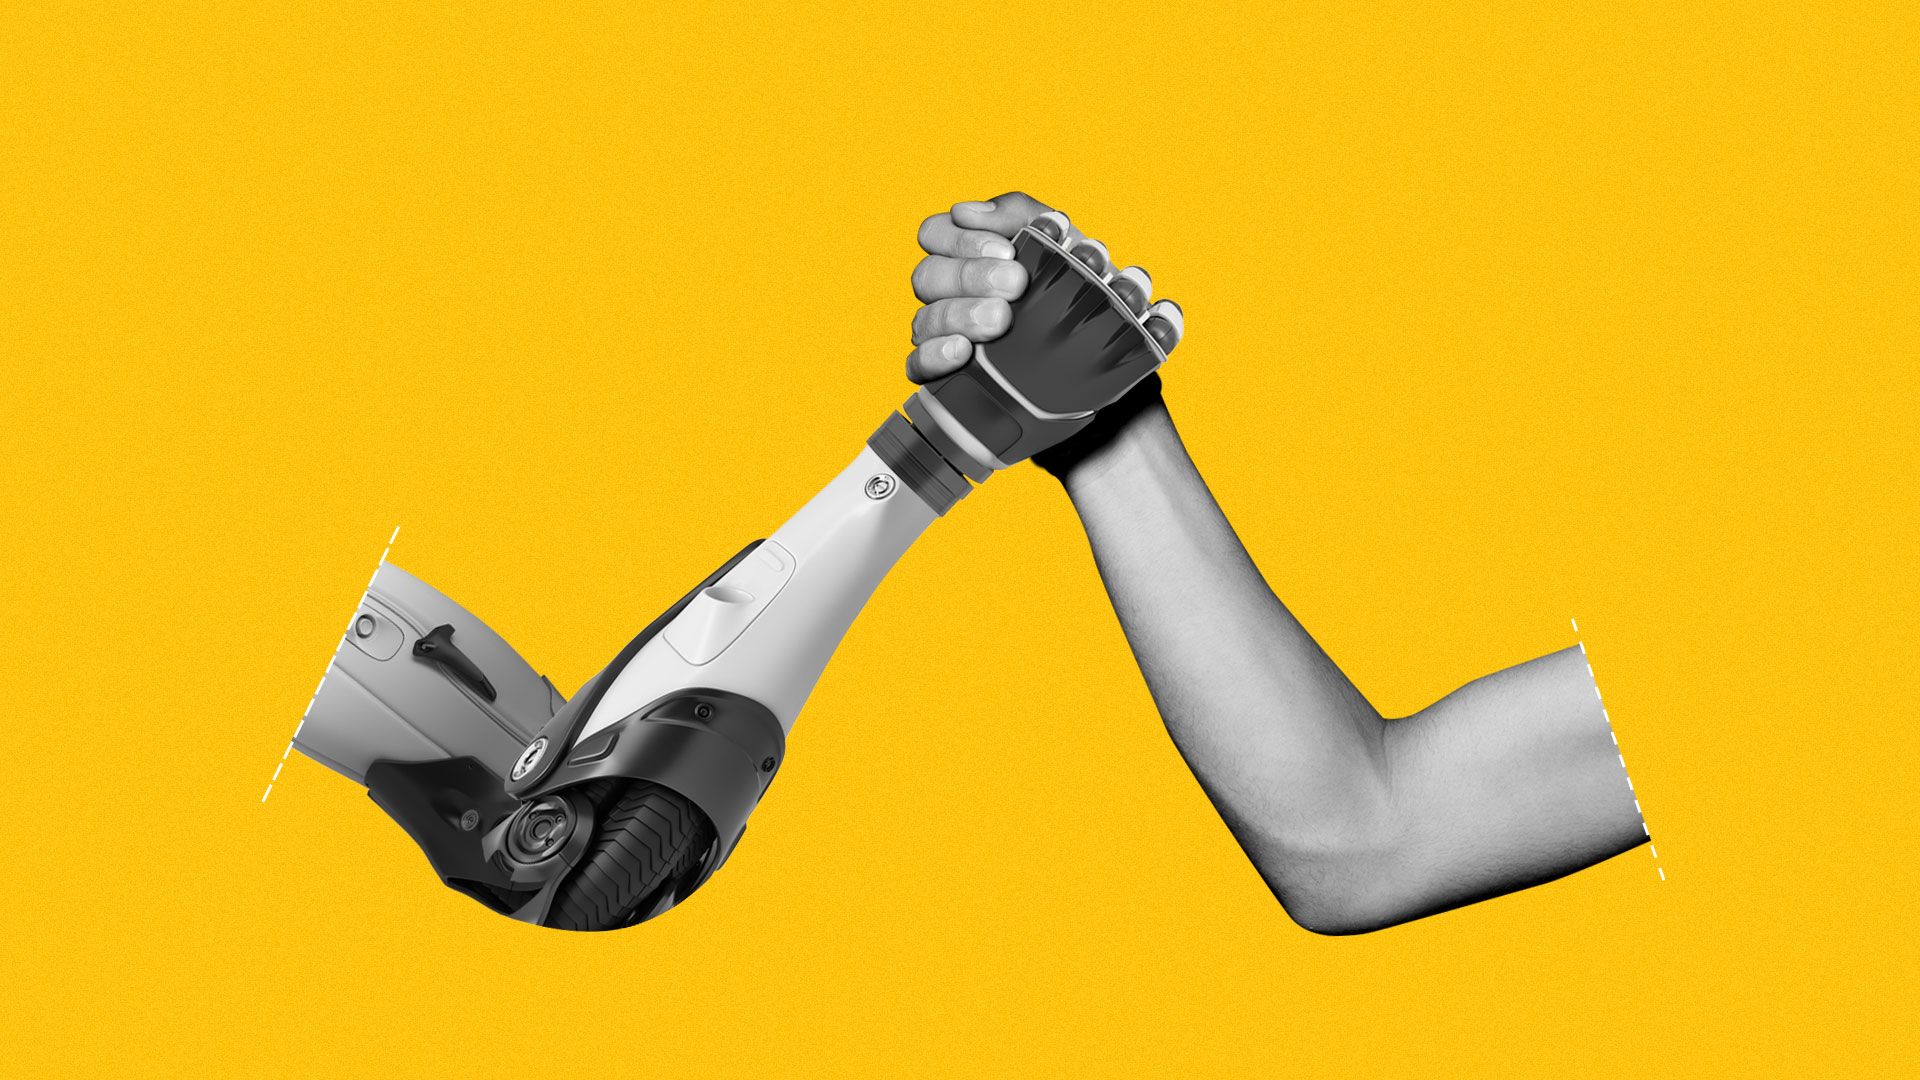 Illustration of a robot and human arms arm-wrestling